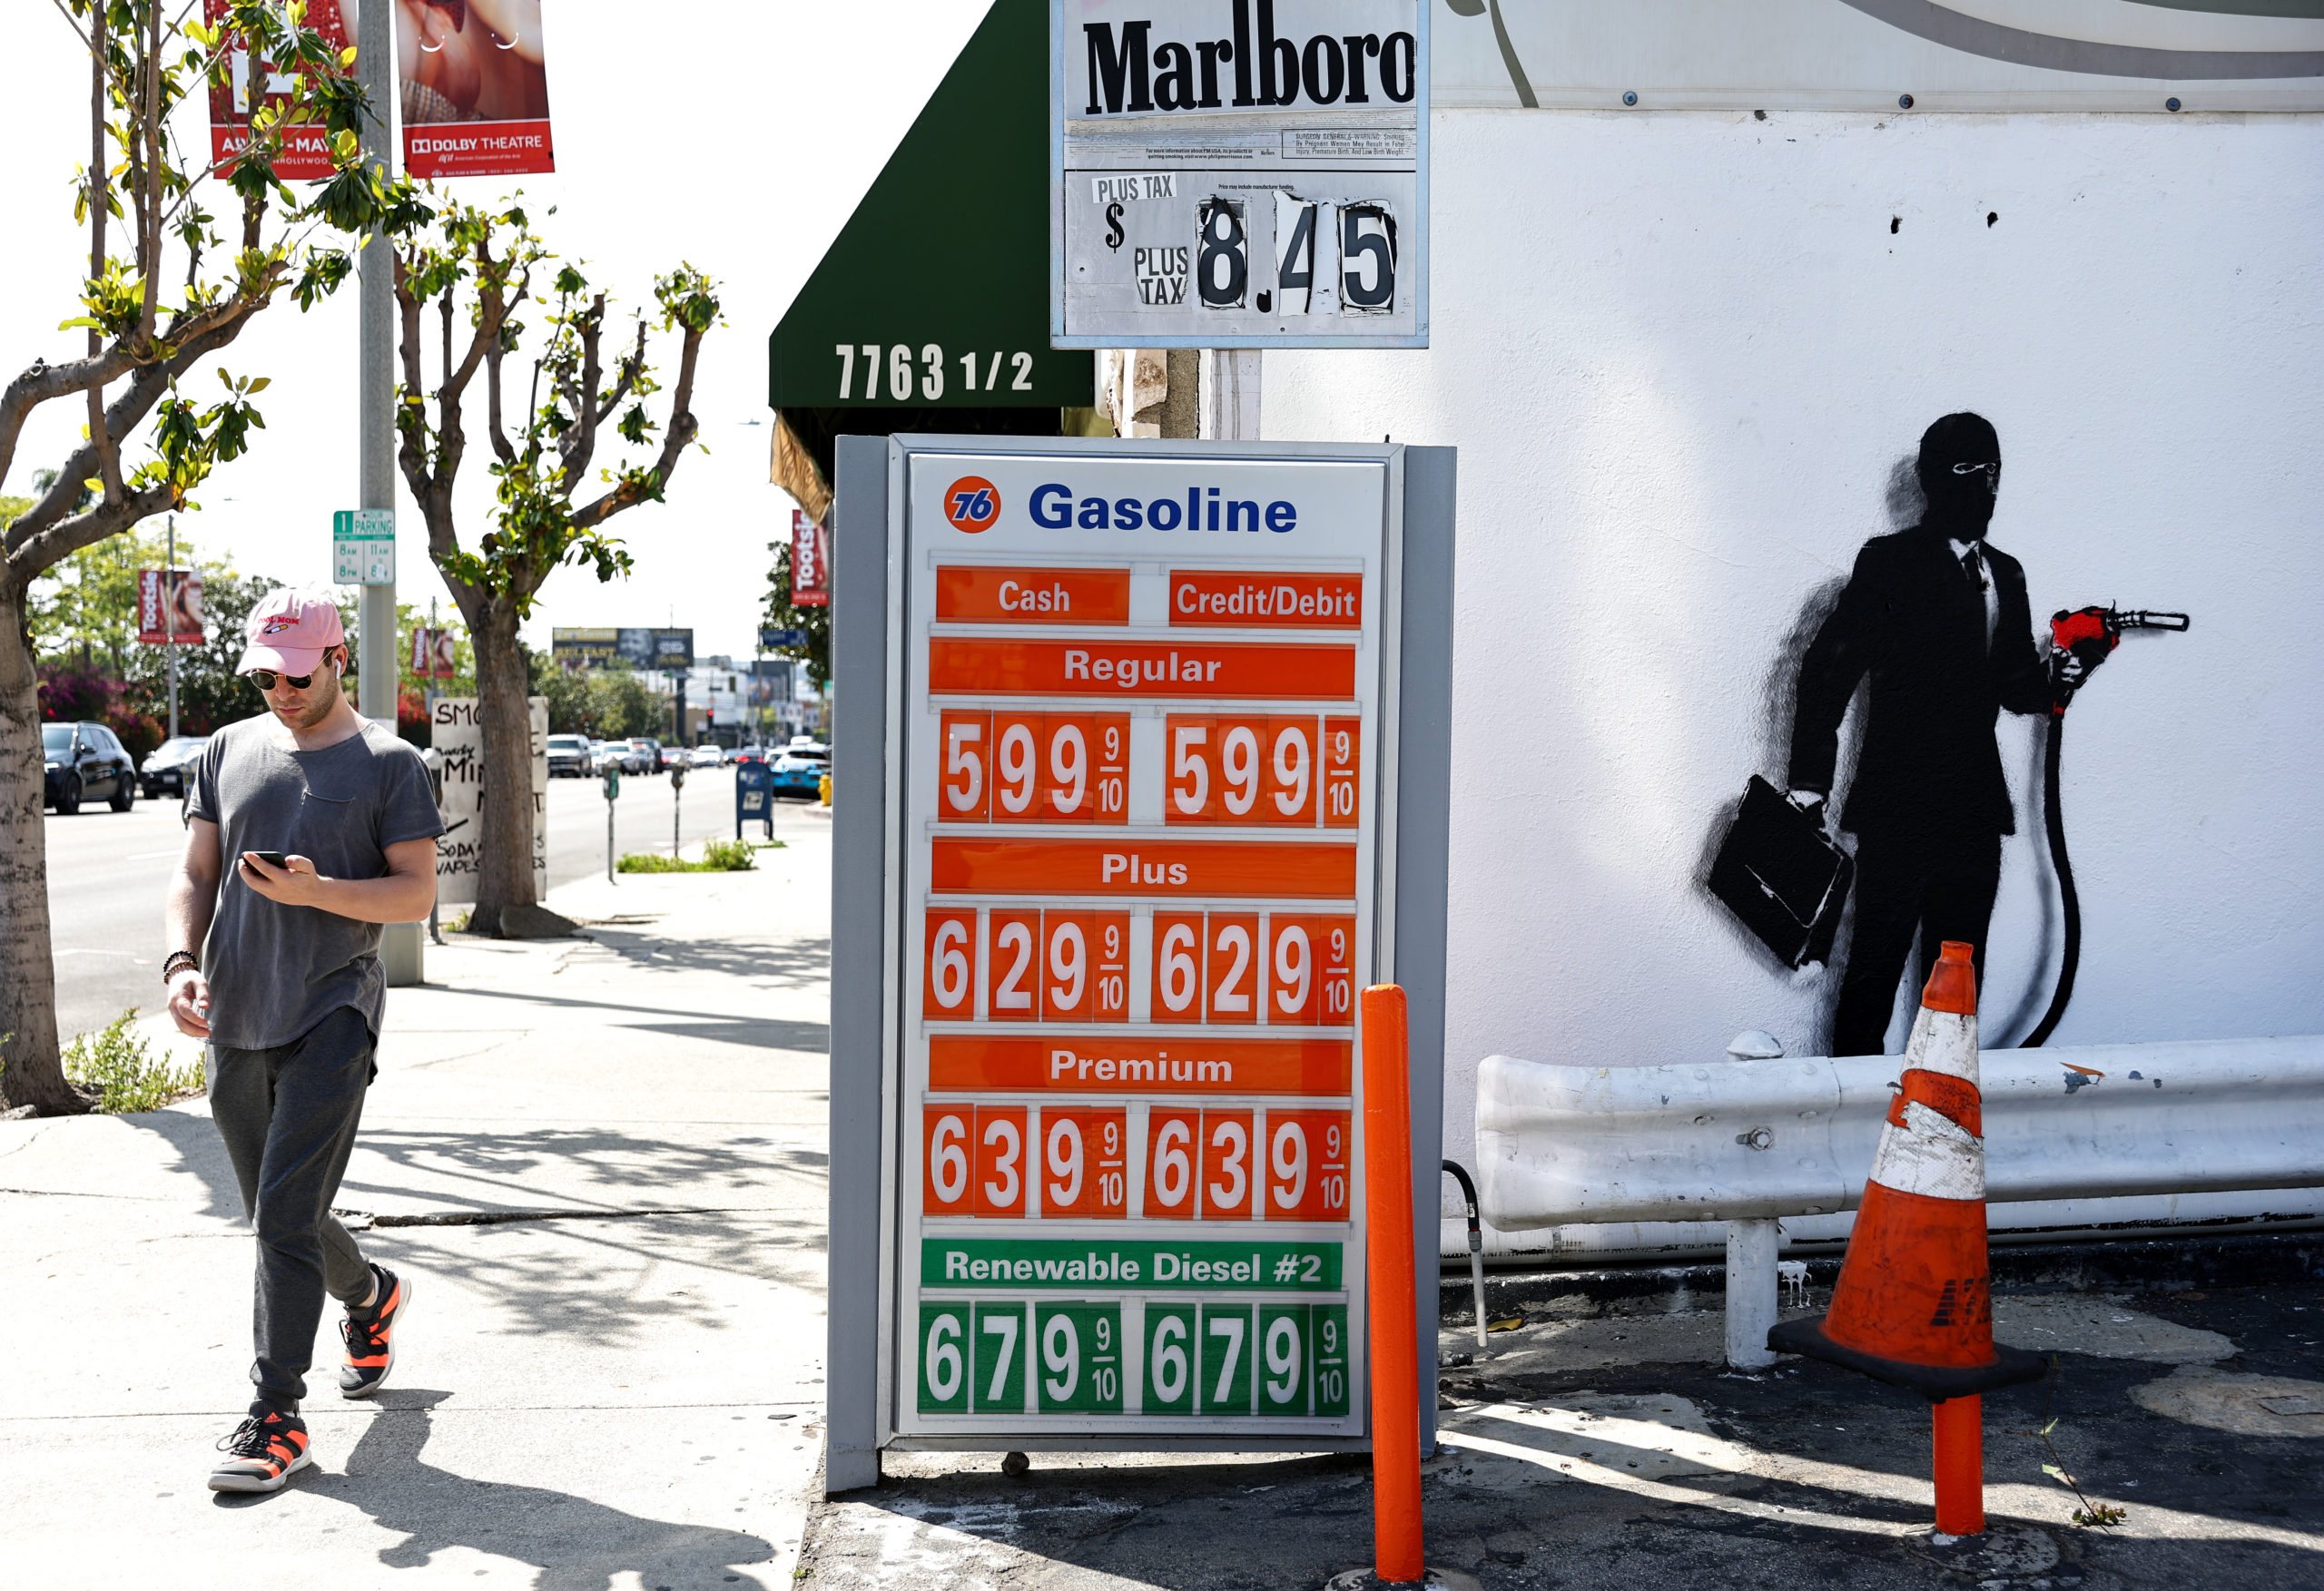 Gas prices are advertised on March 30 in Los Angeles, California. (Mario Tama/Getty Images)